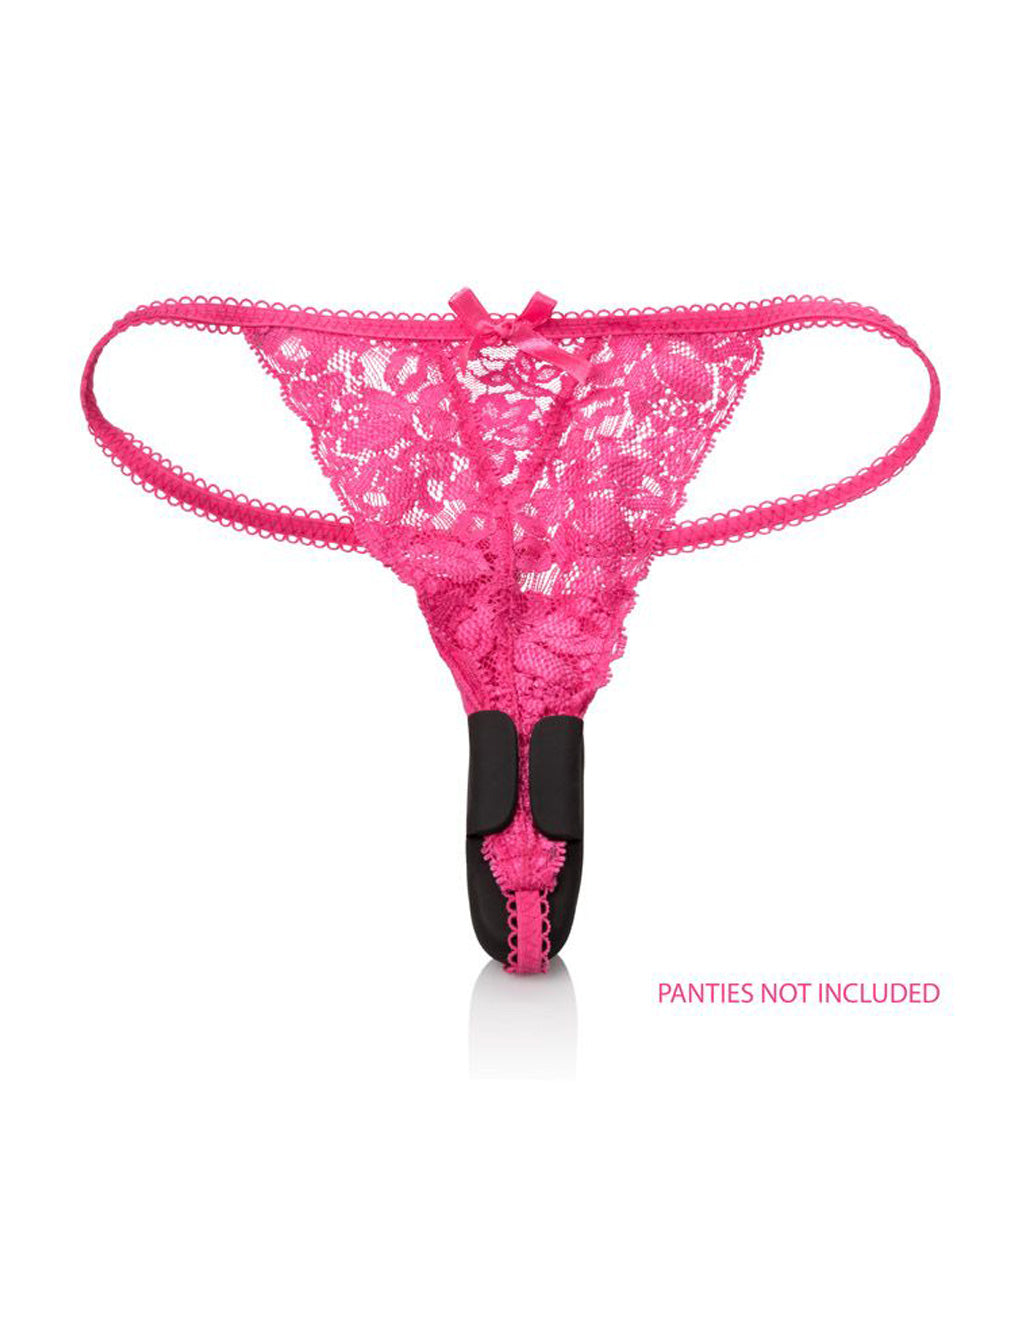 Cal Exotics Lock-N-Play Remote Petite Panty Teaser panty with vibe